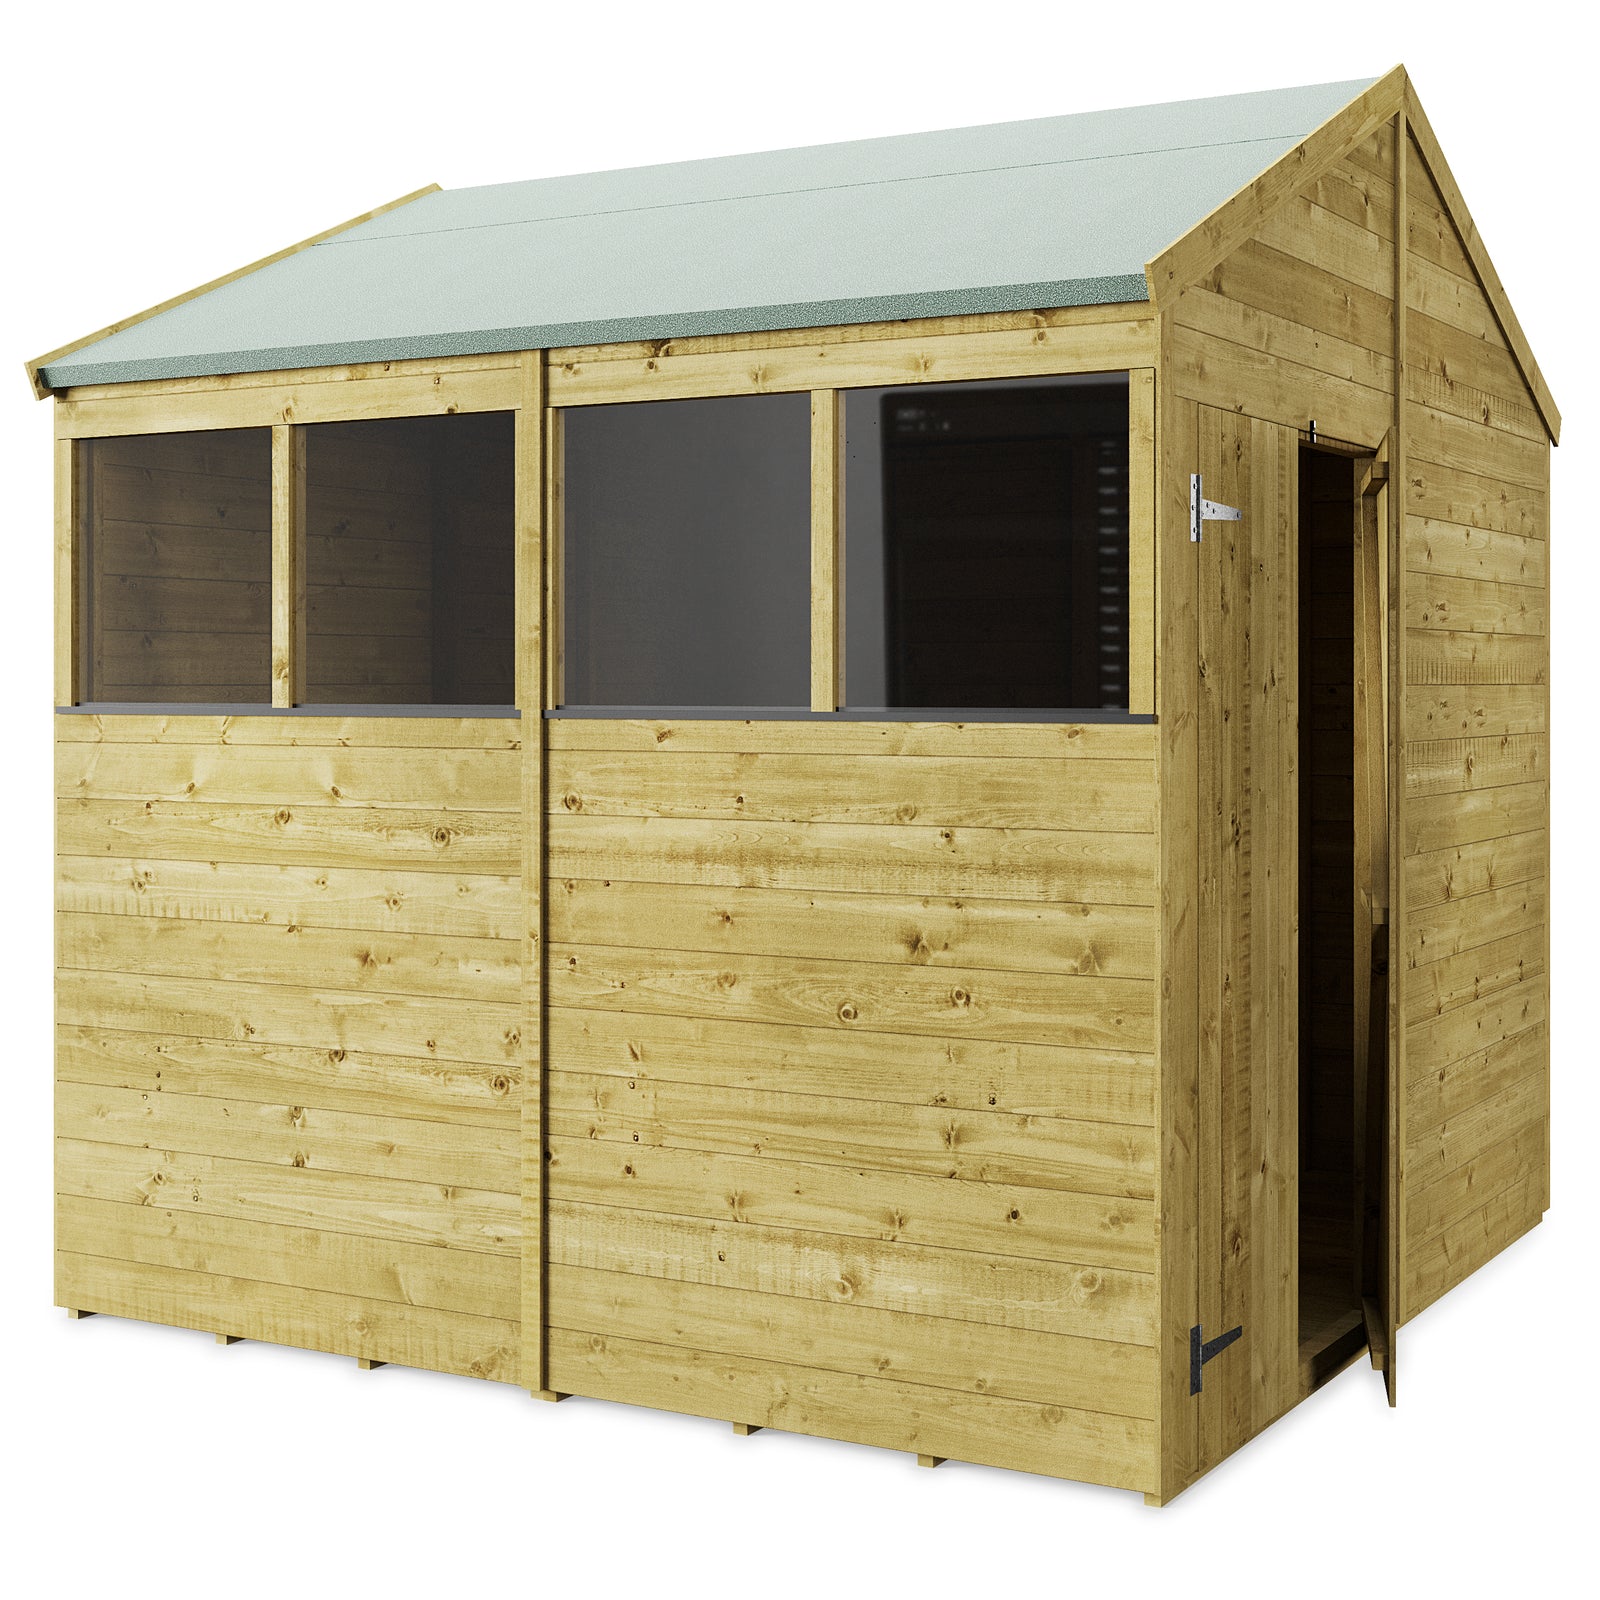 Store More Tongue and Groove Apex Shed - 8x8 Windowed